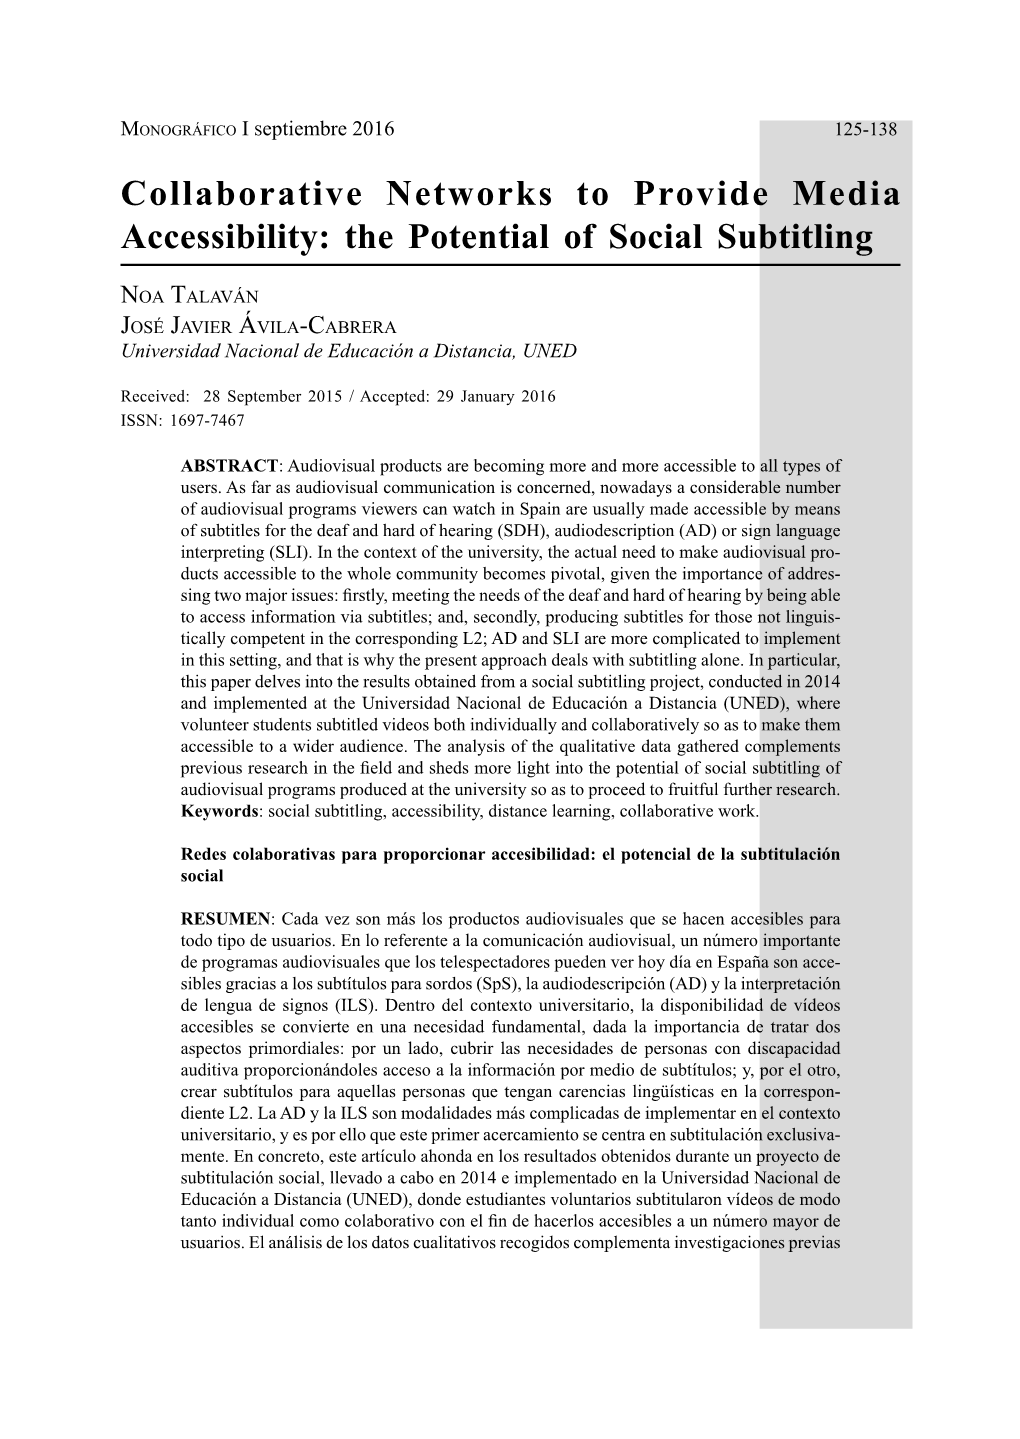 Collaborative Networks to Provide Media Accessibility: the Potential of Social Subtitling